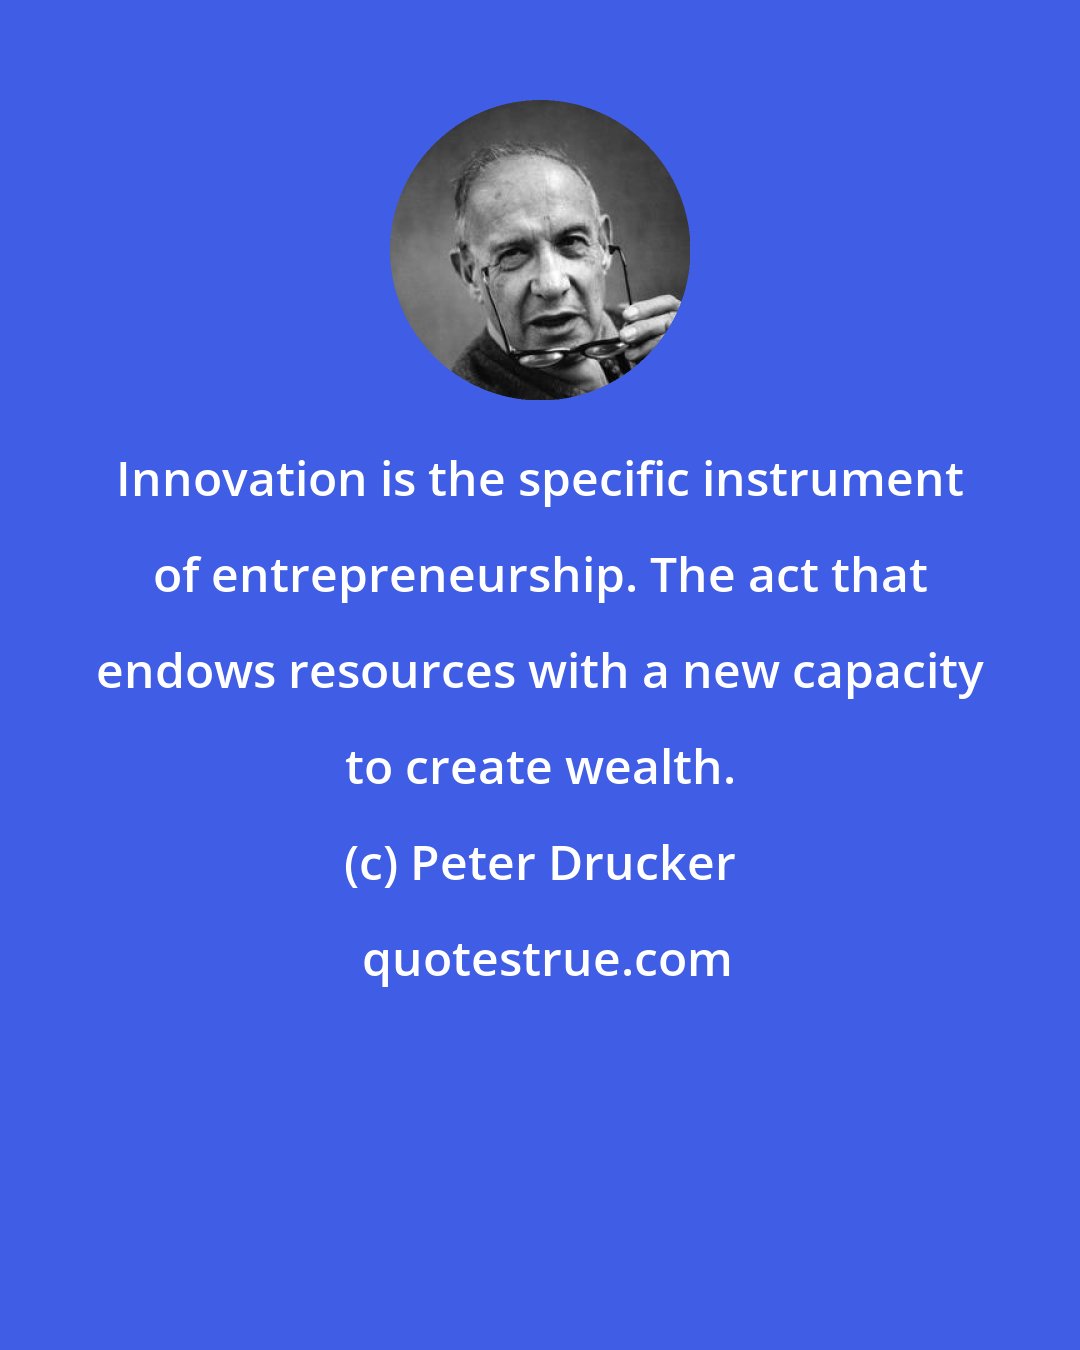 Peter Drucker: Innovation is the specific instrument of entrepreneurship. The act that endows resources with a new capacity to create wealth.